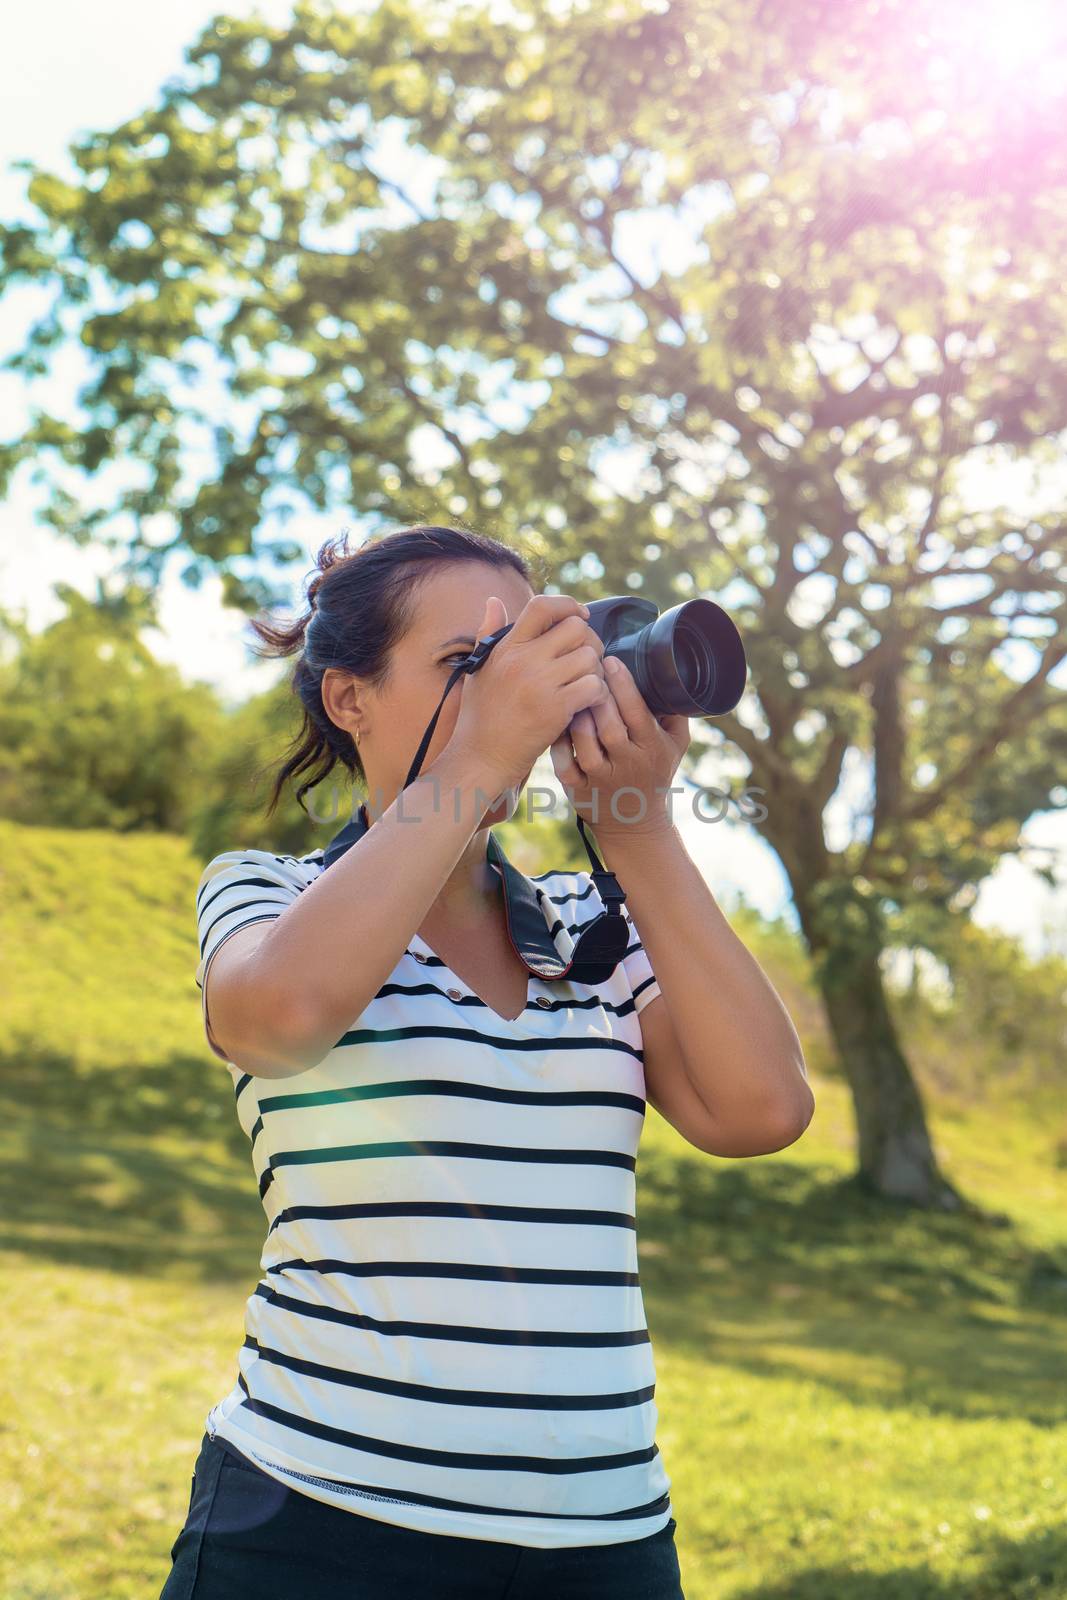 A black hair standing woman with a camera taking pictures